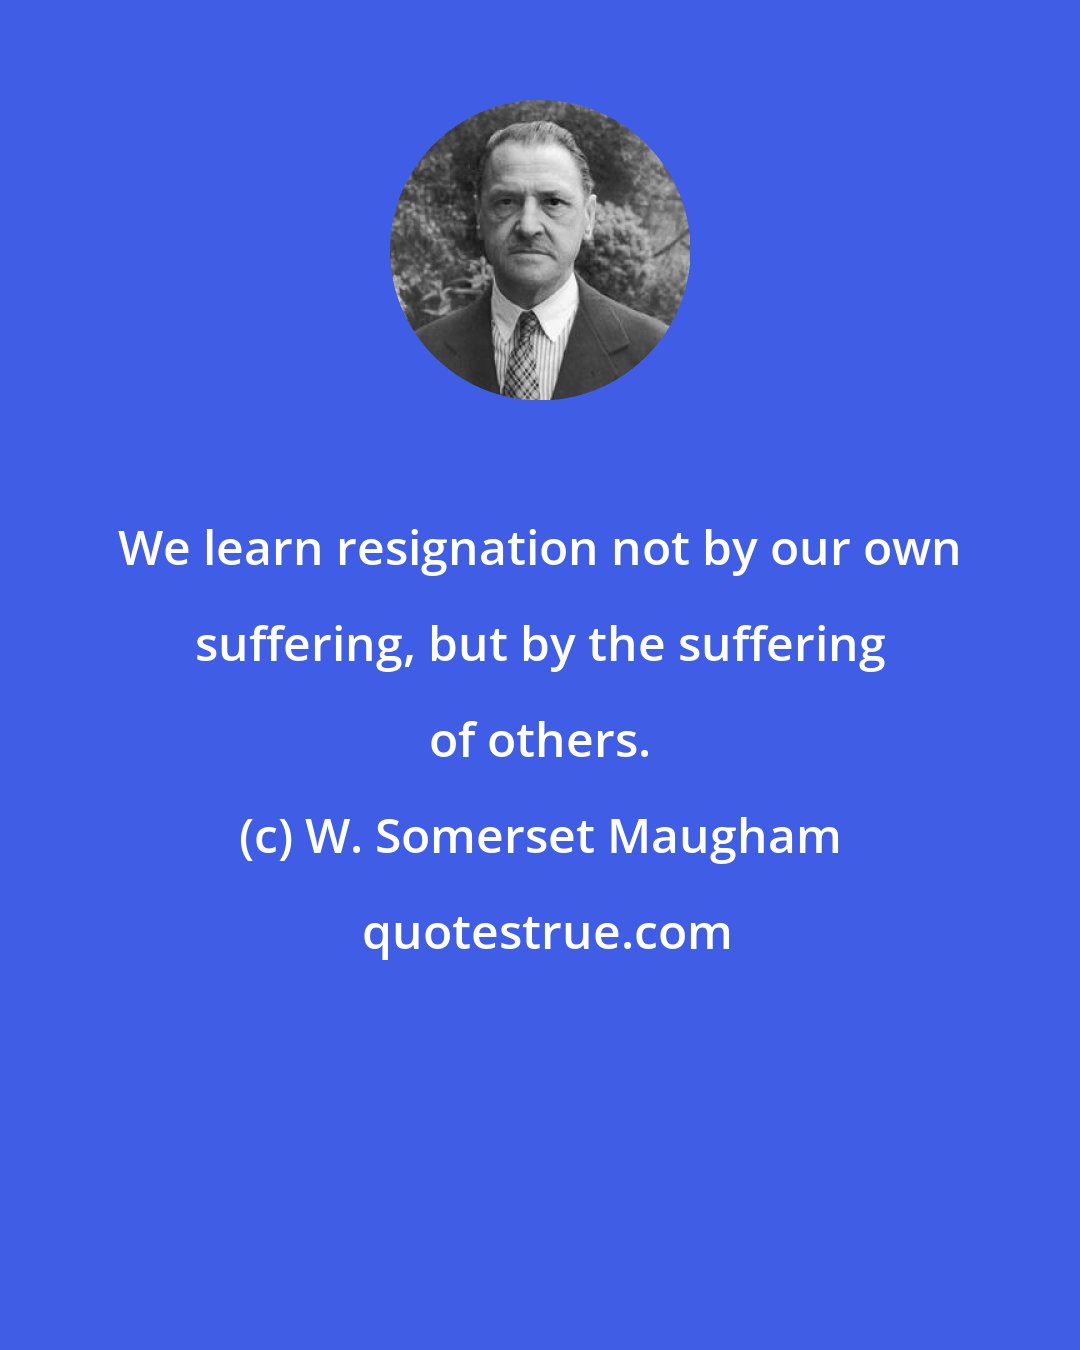 W. Somerset Maugham: We learn resignation not by our own suffering, but by the suffering of others.